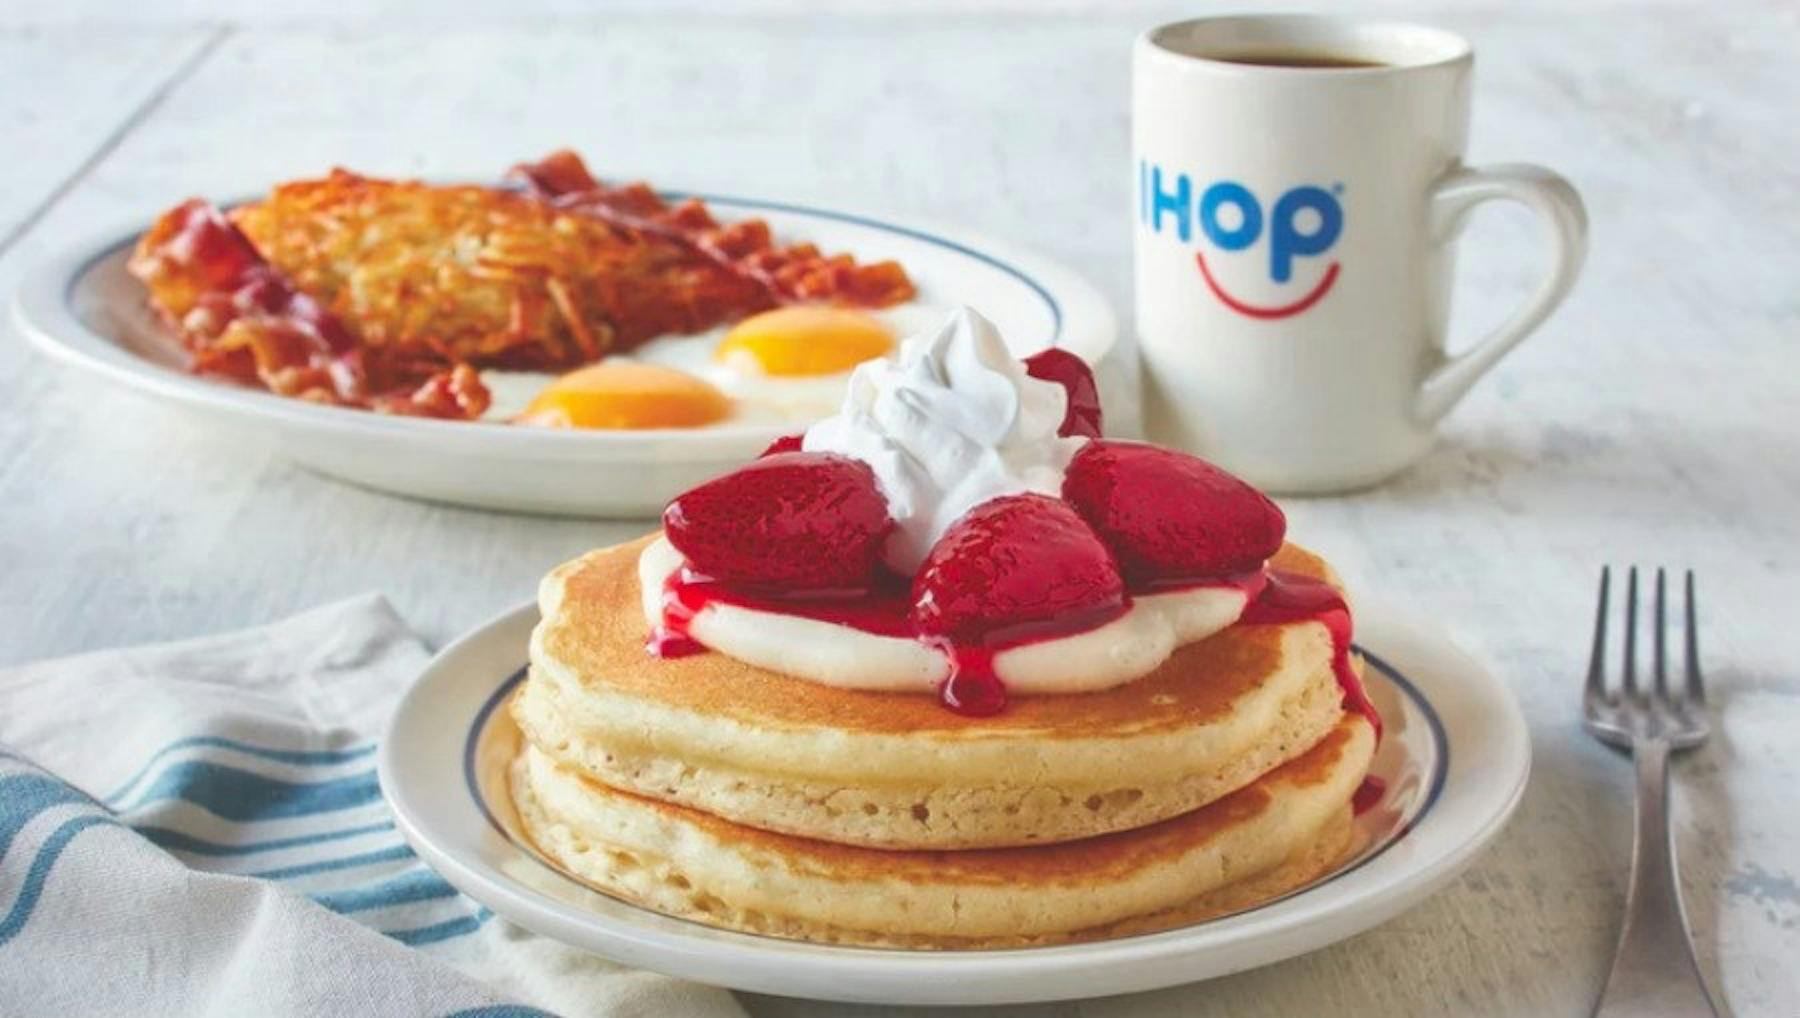 IHOP - 551 NW US Highway 24 in Topeka - Highlight